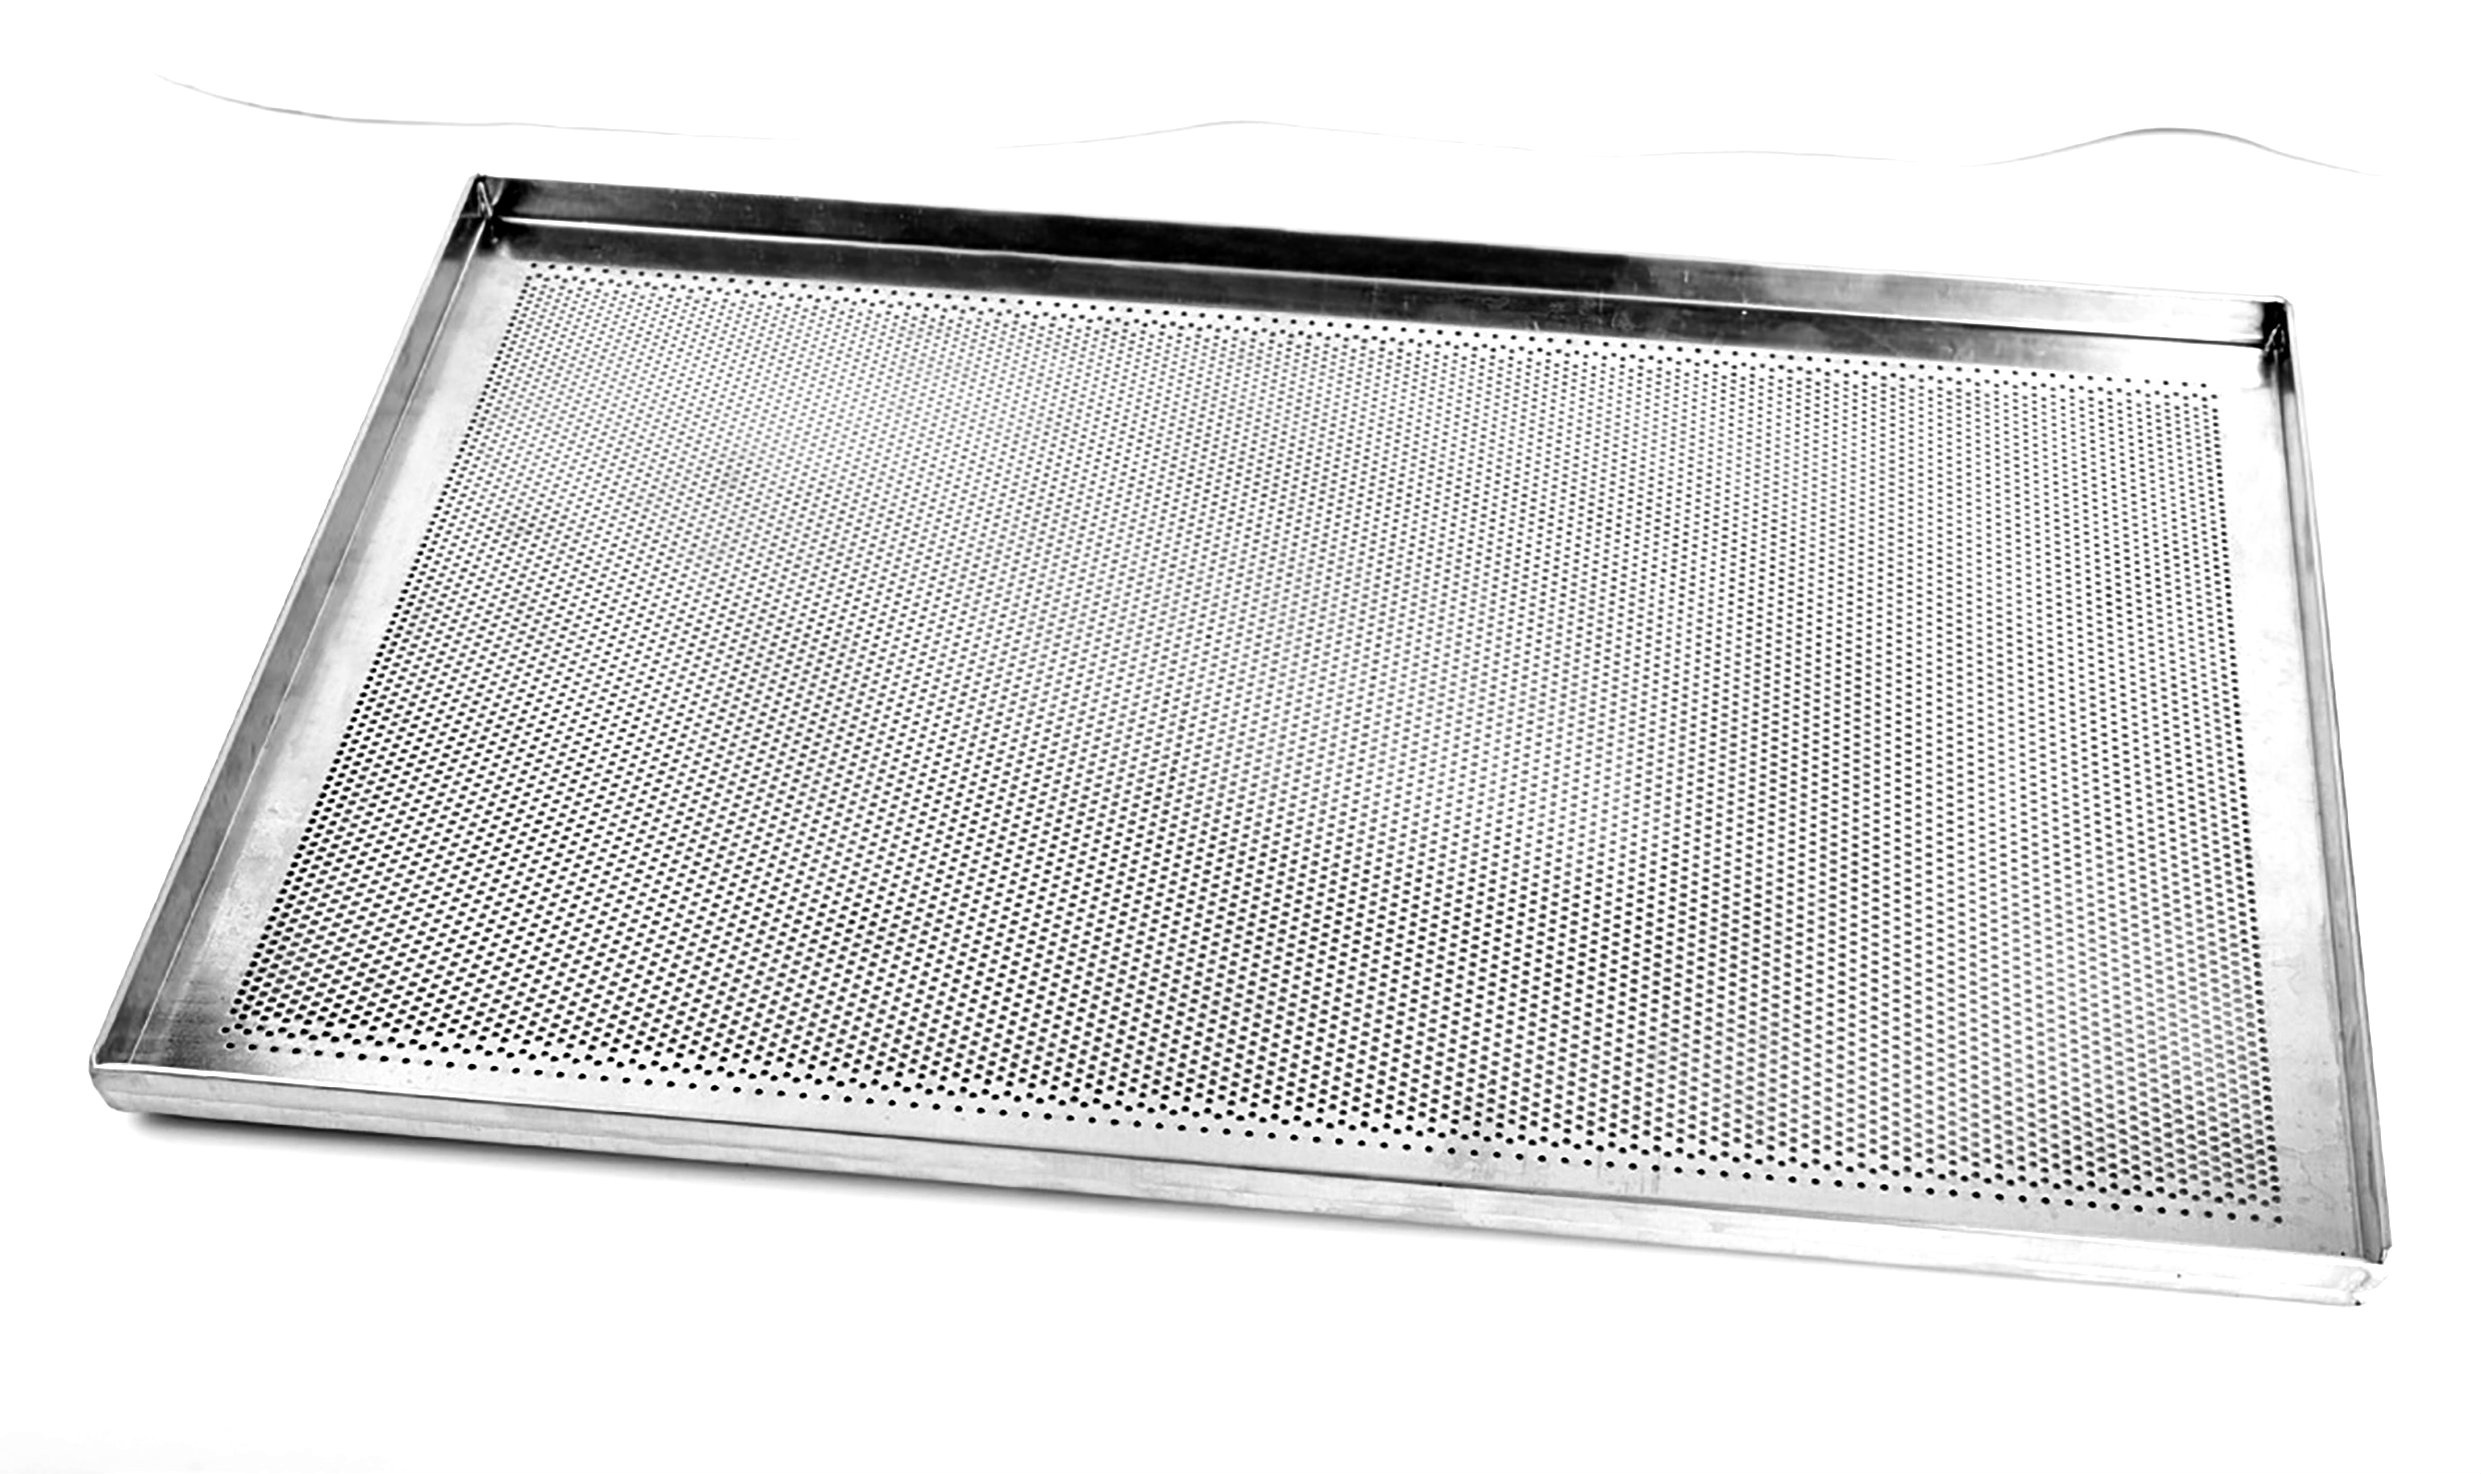 https://www.pastrychefsboutique.com/18065/pavoni-jf06040d20p00g-stainless-steel-perforated-full-size-sheet-pan-straight-edges-600-x-400-mm-sheet-pans-extenders.jpg